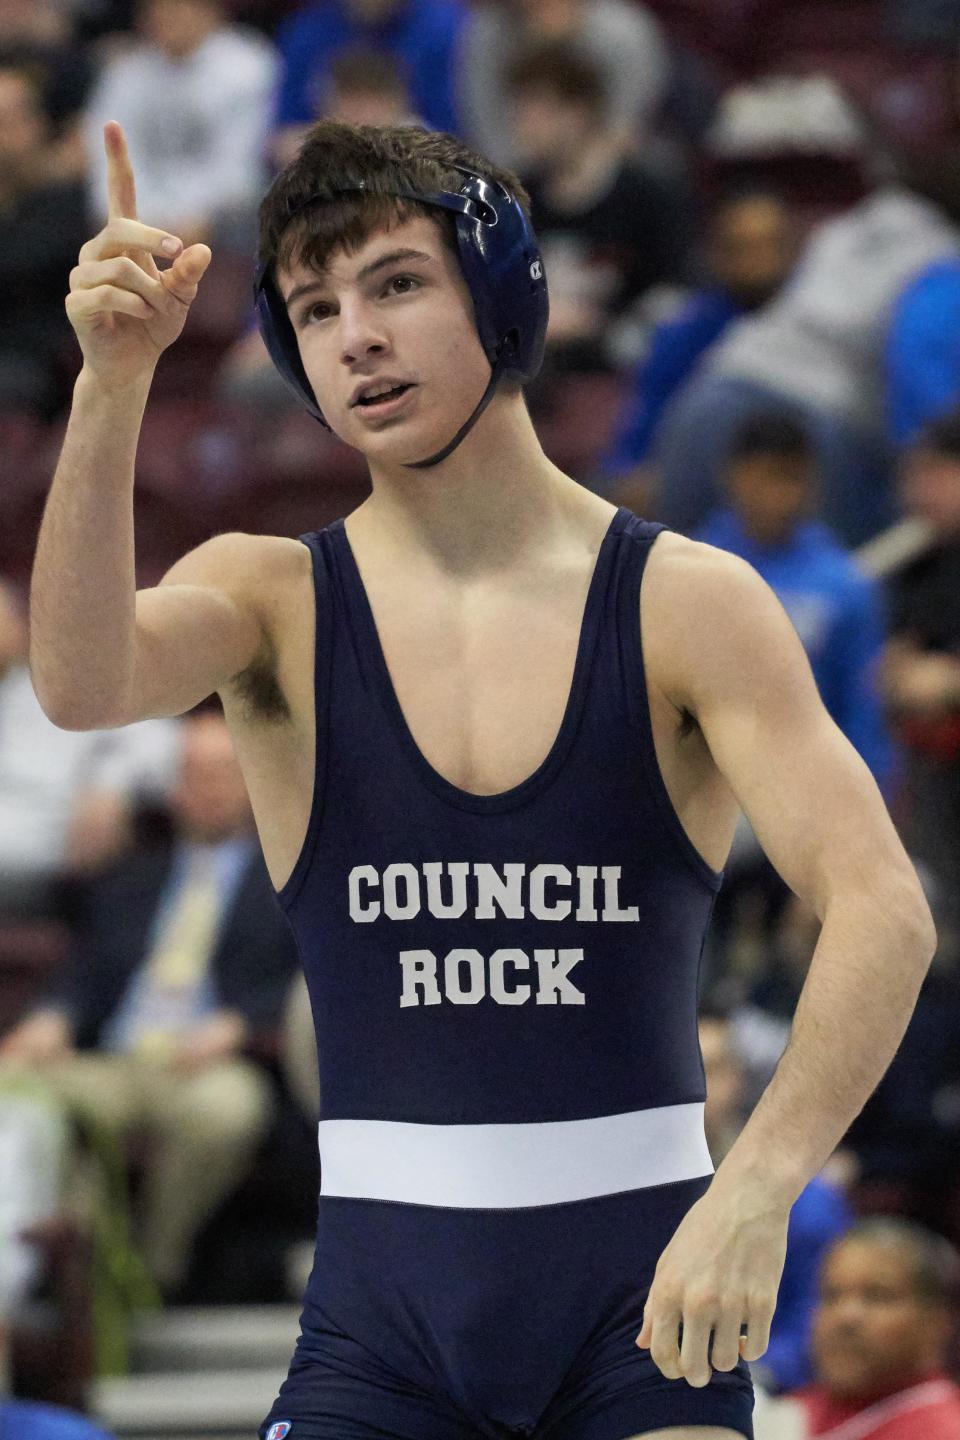 Council Rock North's Kyle Hauserman, a 2021 graduate, was a three-time PIAA Class 3A medalist.